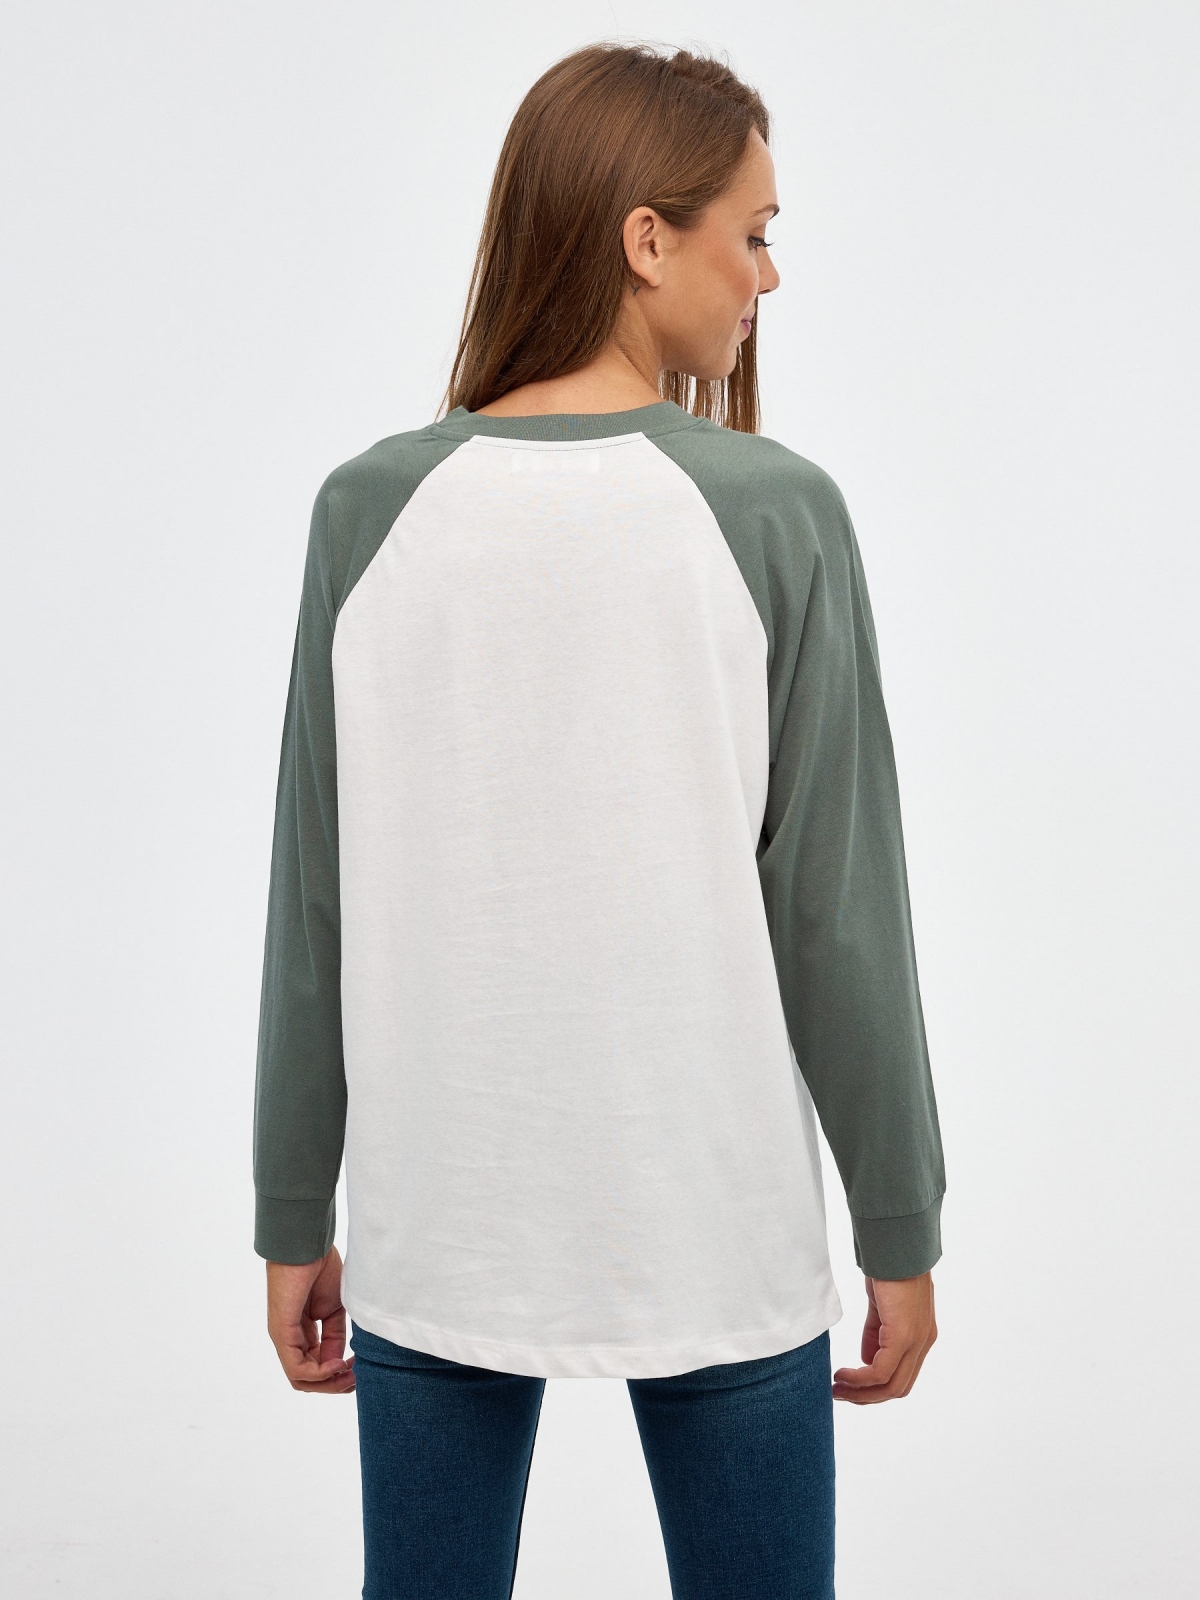 Montmartre T-shirt greyish green middle back view